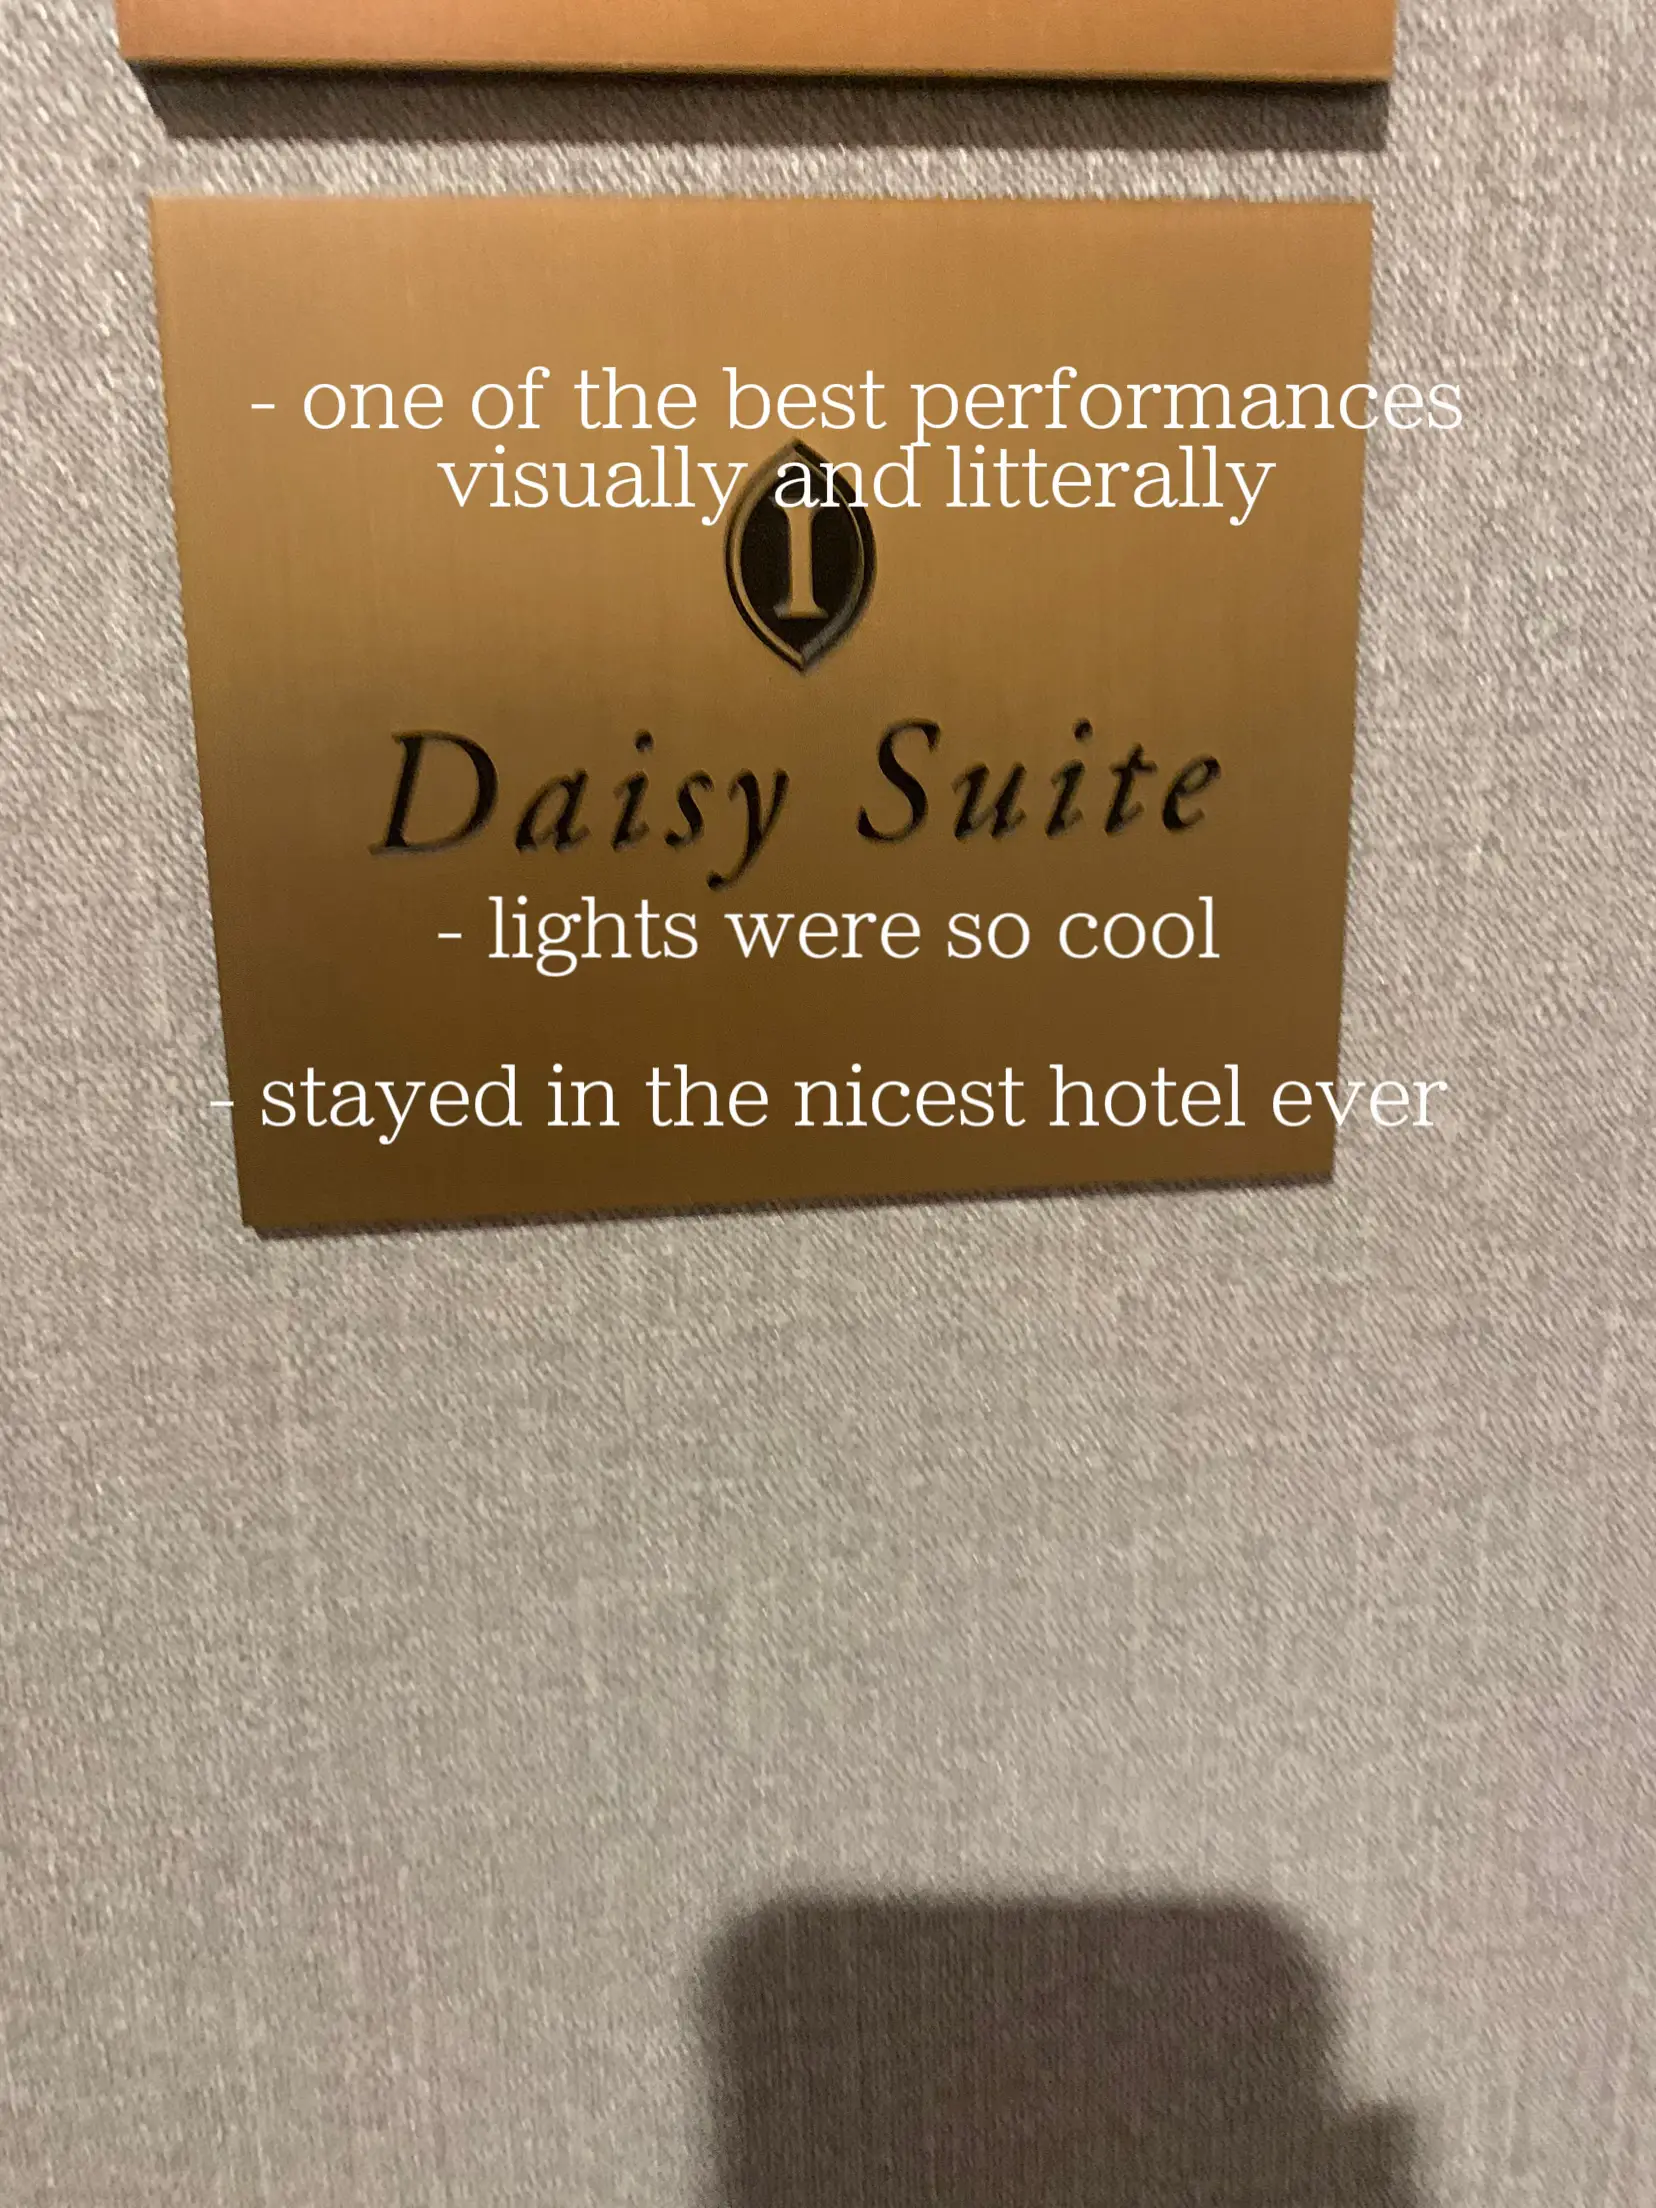  A hotel room with a sign that says "daisy suite".